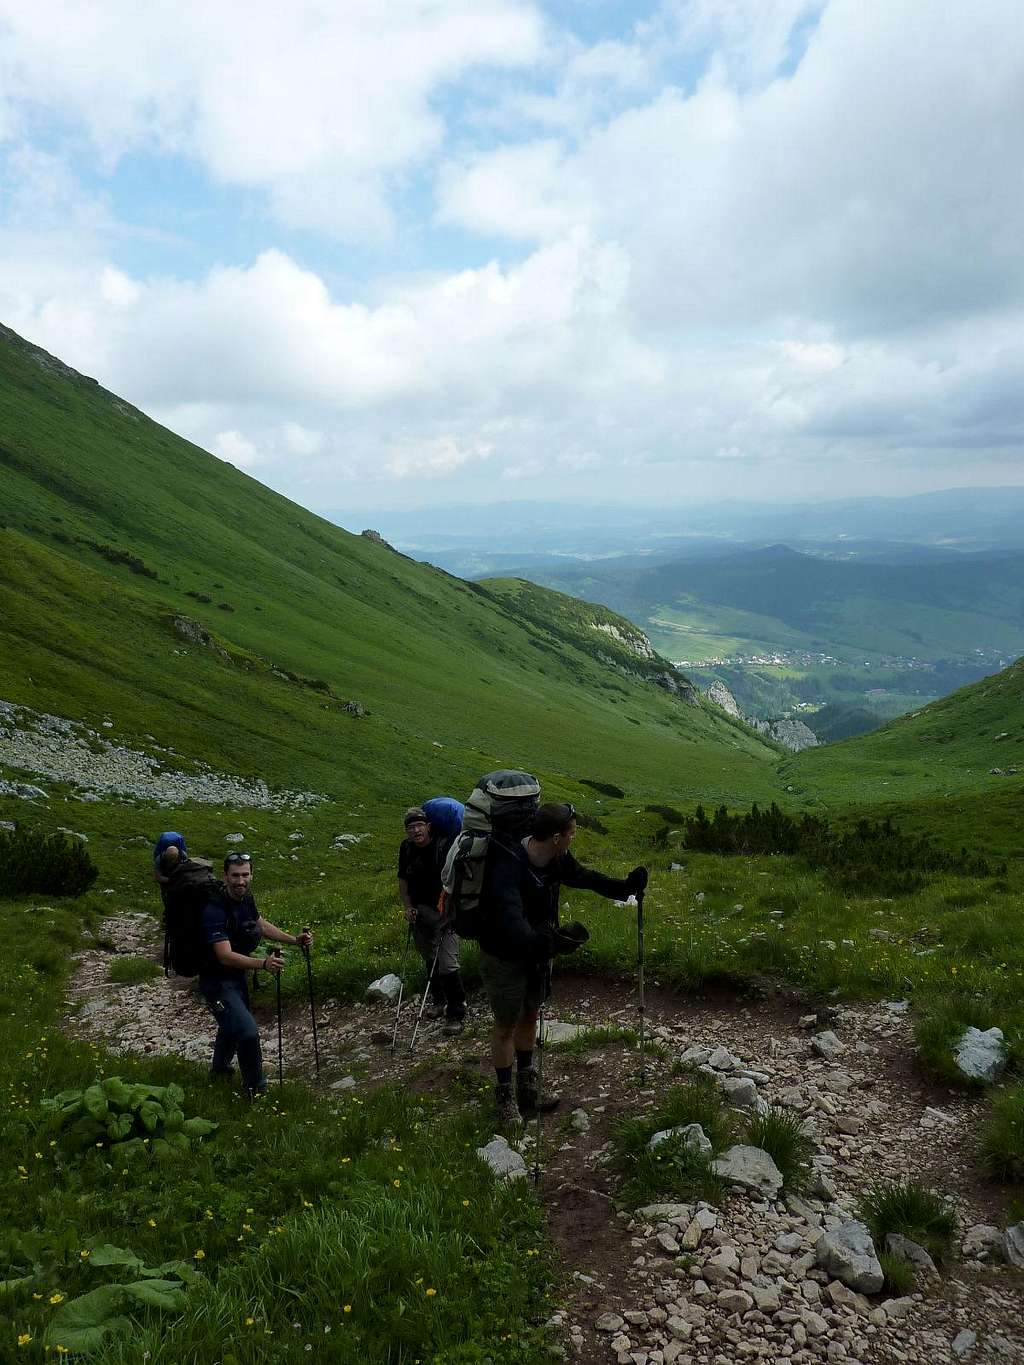 Hiking up the Monkova valley